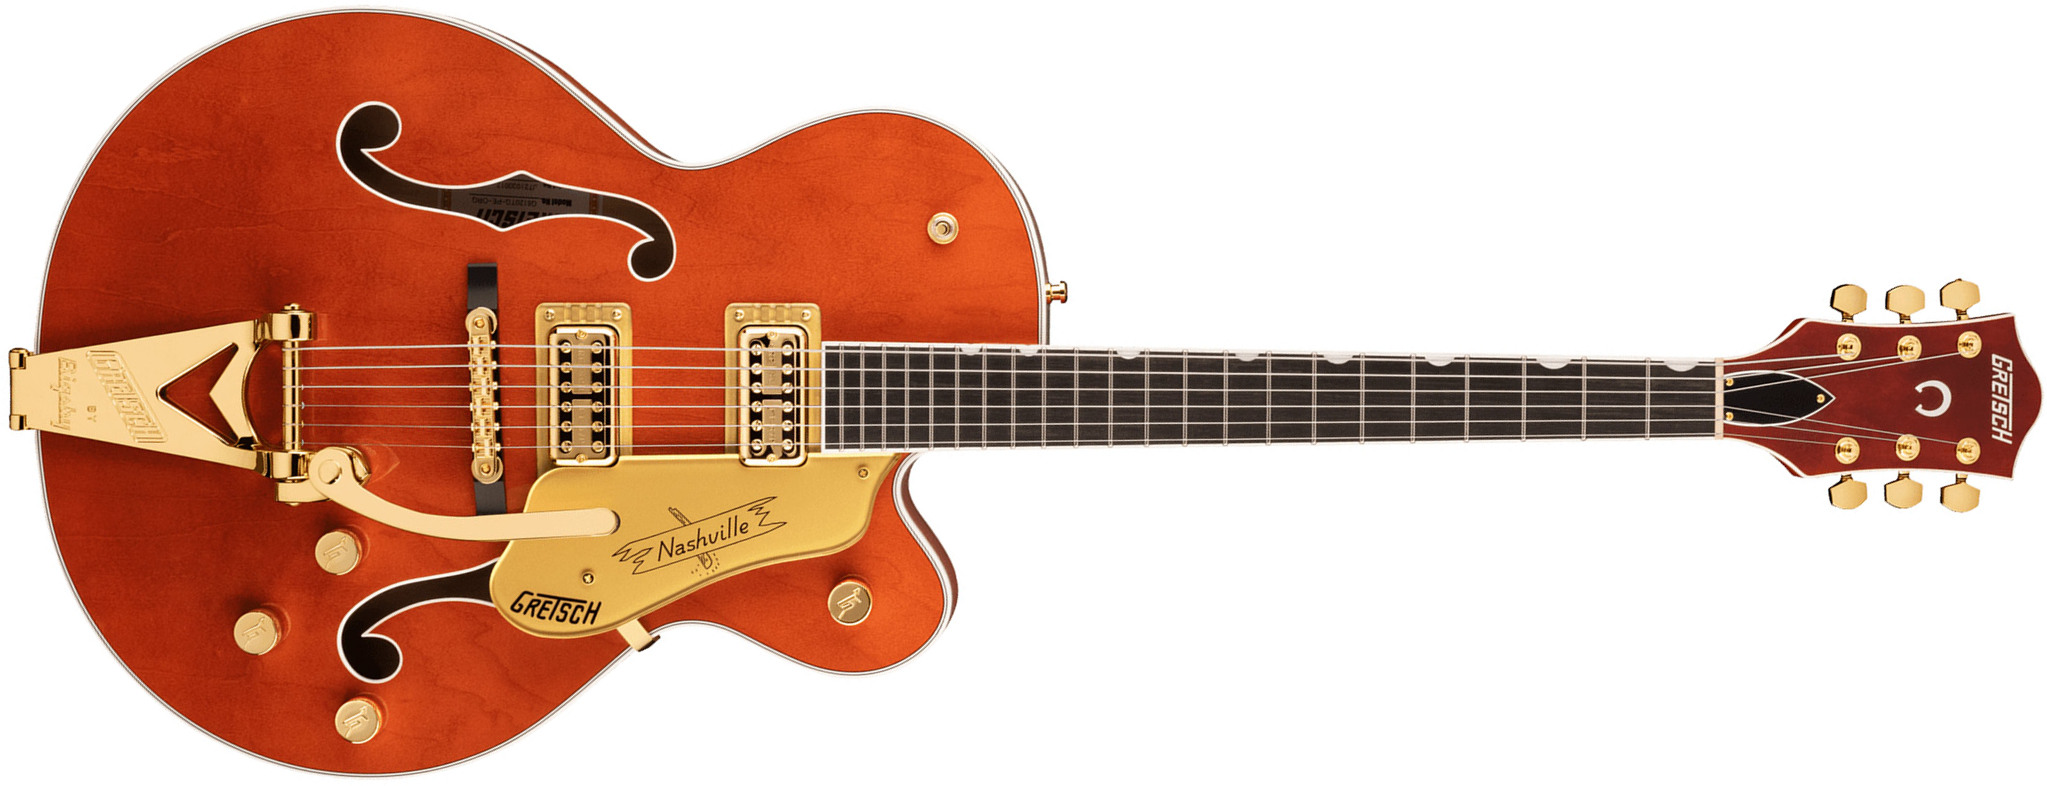 Gretsch G6120tg Players Edition Nashville Pro Jap Bigsby Eb - Orange Stain - Hollow-body electric guitar - Main picture